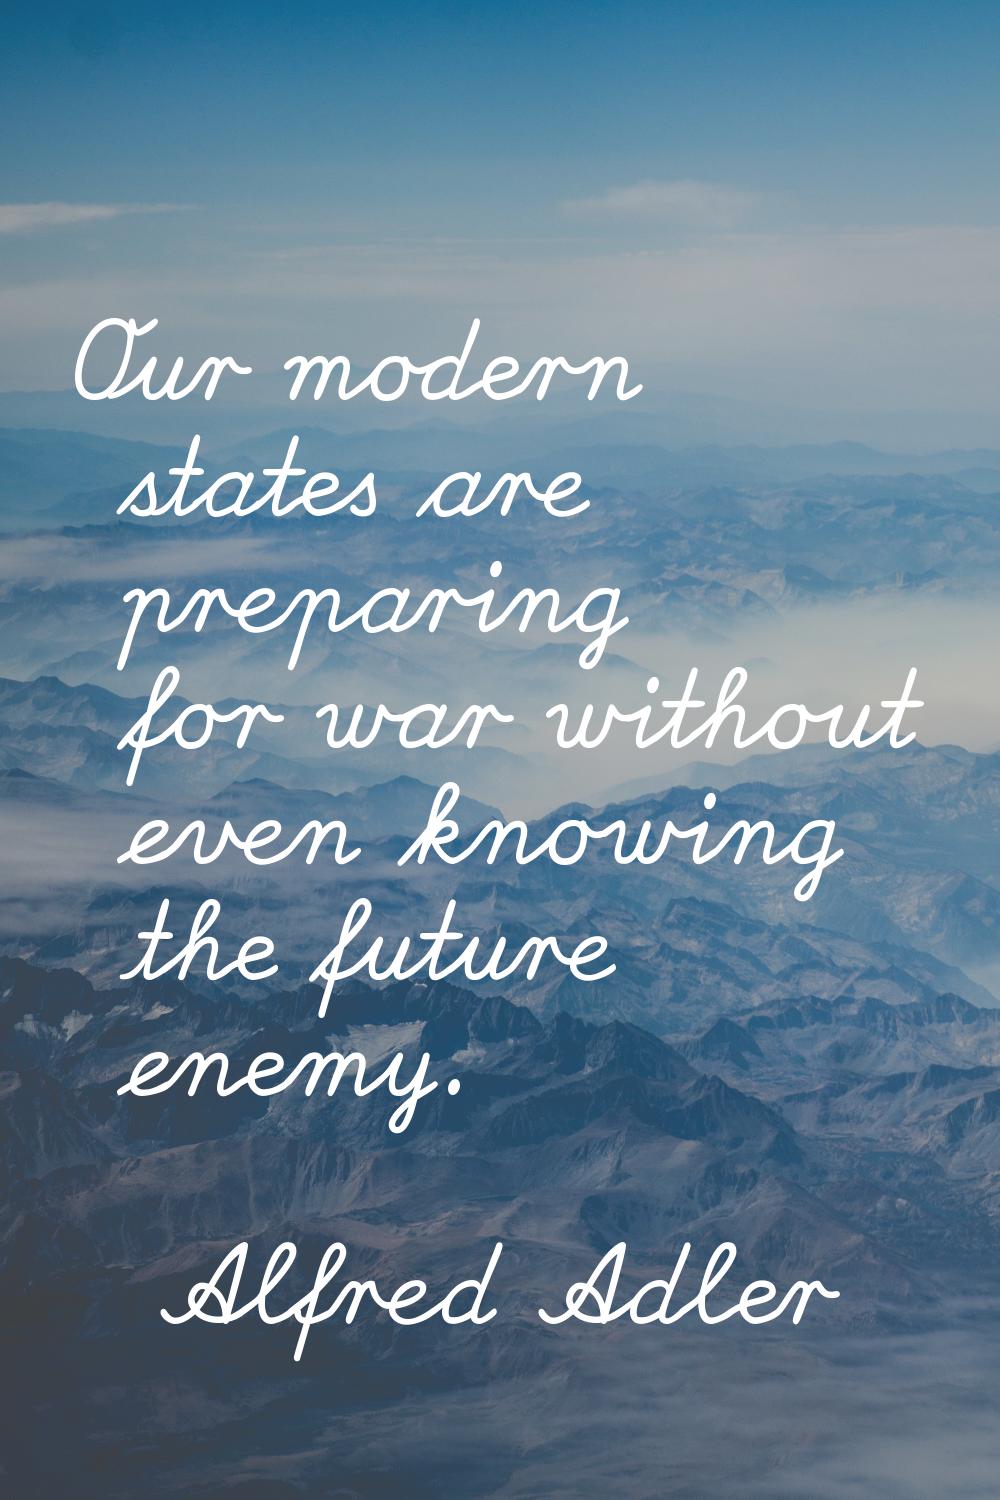 Our modern states are preparing for war without even knowing the future enemy.